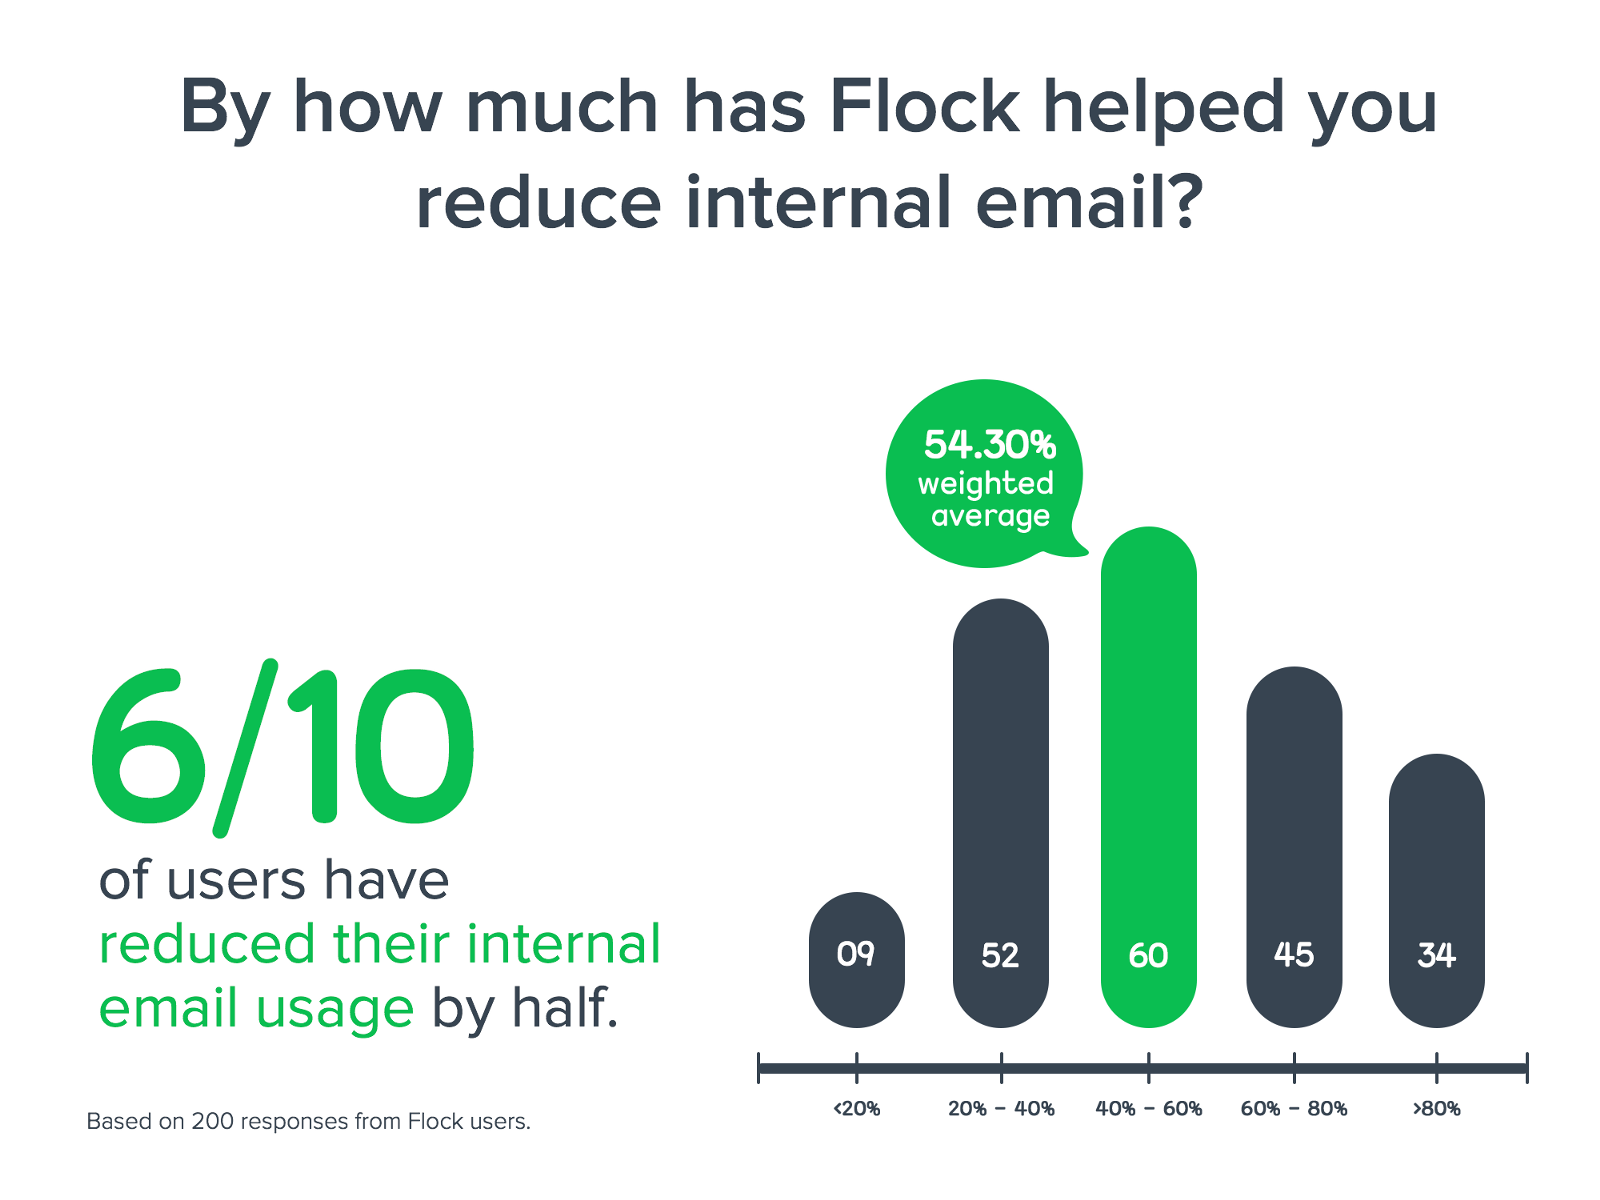 Graphic: 6/10 of Flock users reduced their internal email usage by half.